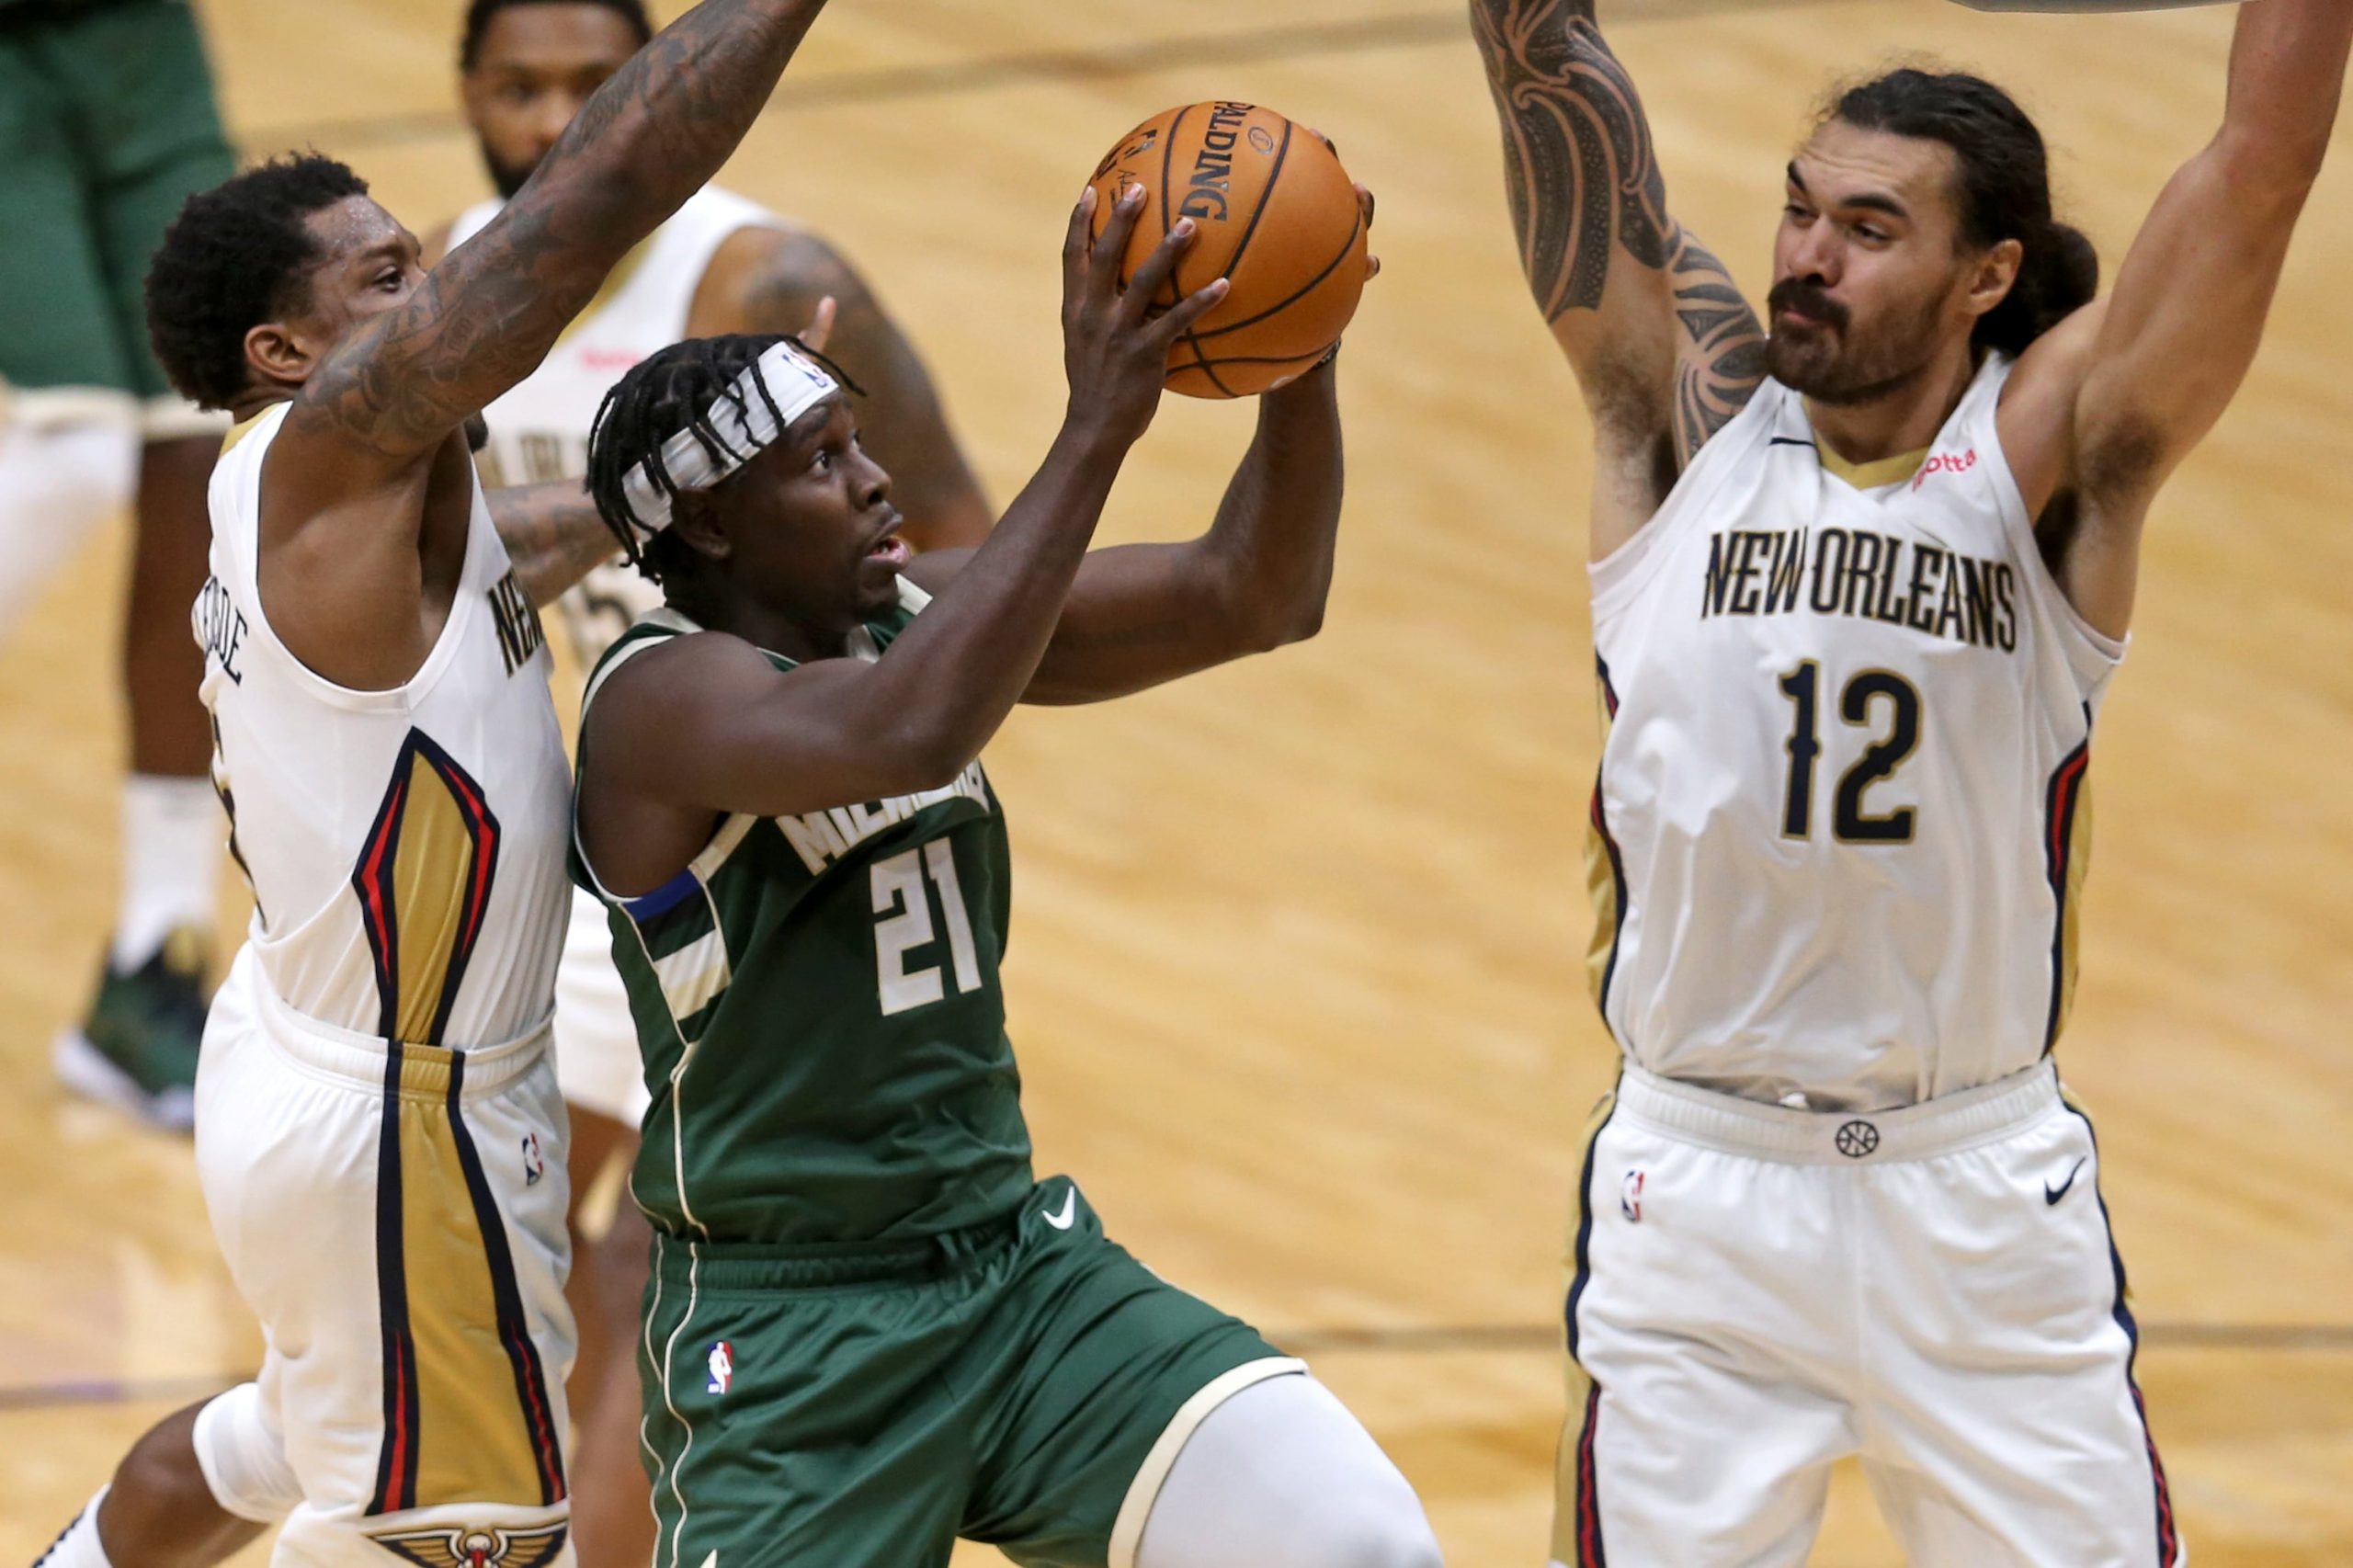 Milwaukee Bucks guard Jrue Holiday (21) drives against New Orleans Pelicans guard Eric Bledsoe (6) and center Steven Adams (12) in the second half at the Smoothie King Center.